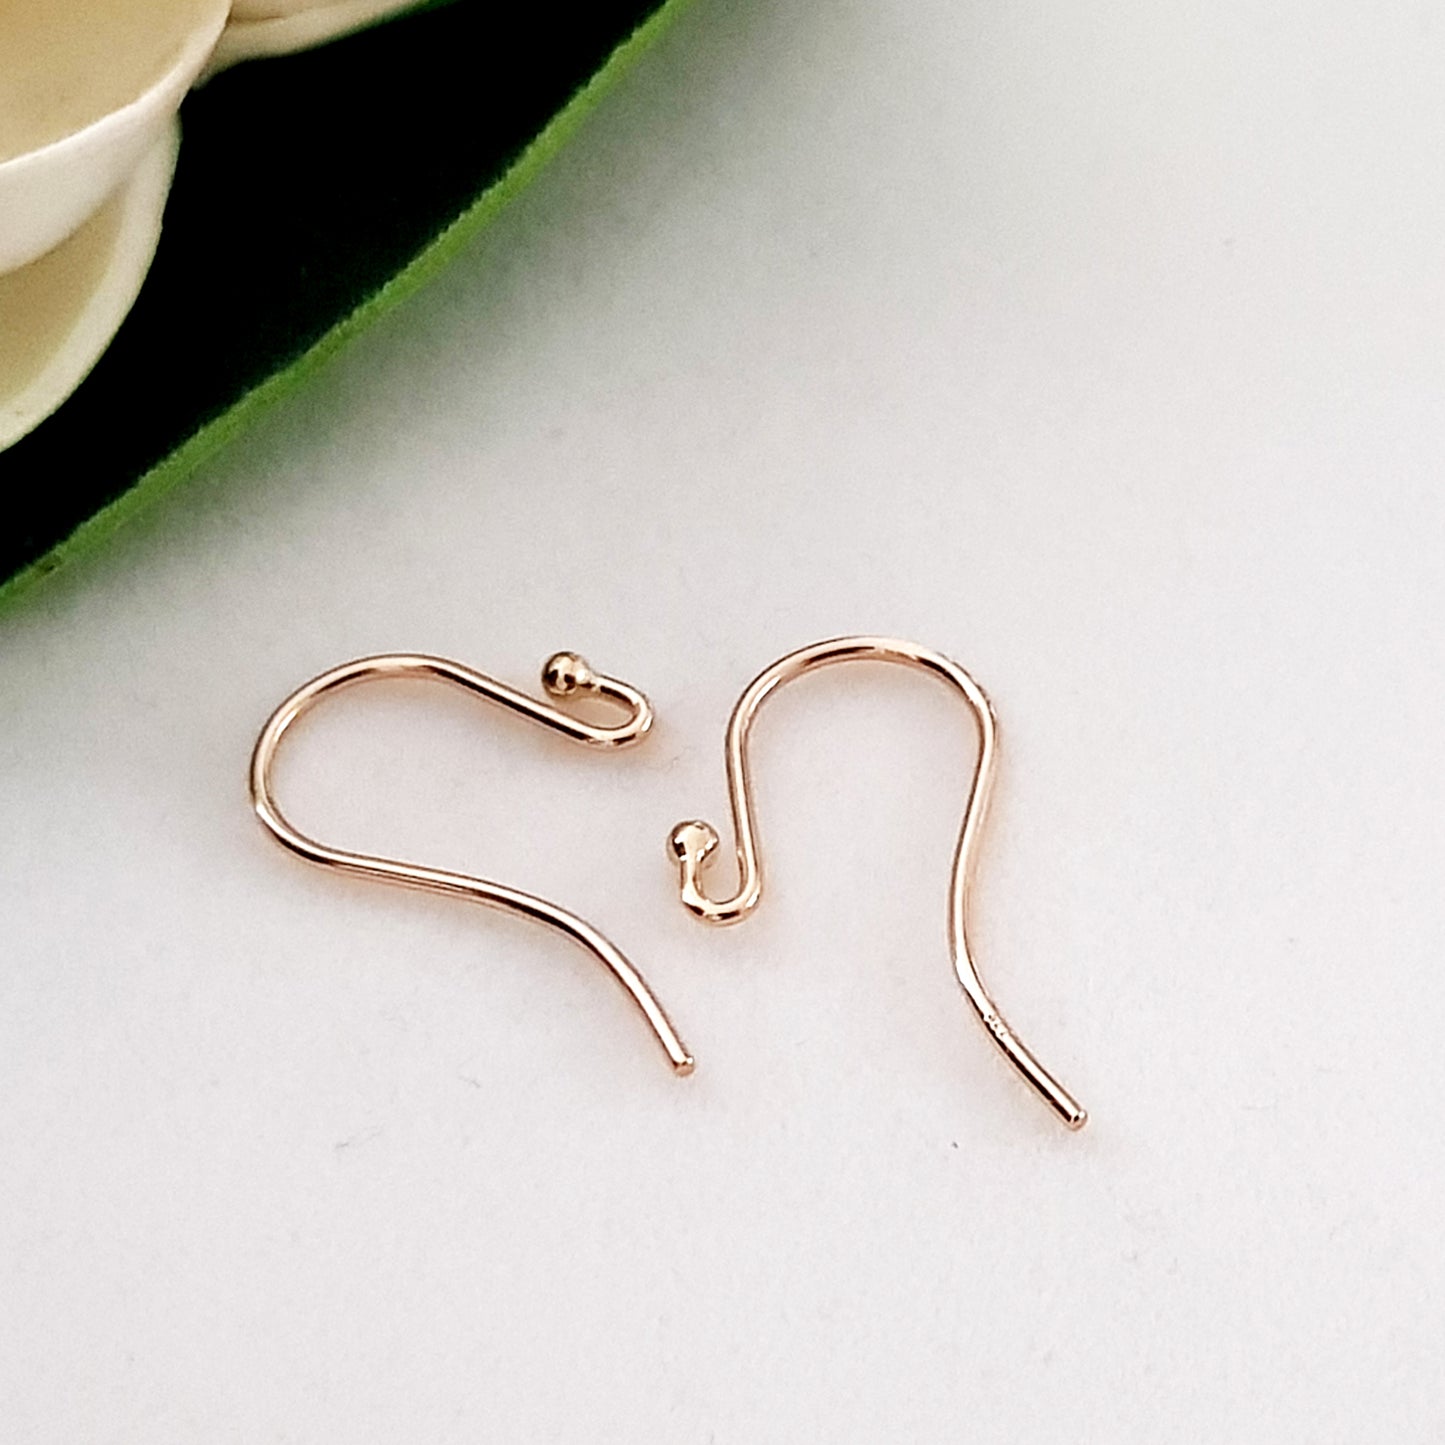 Earring Hooks - Balled Ends 9ct Yellow Gold Hooks Quality Findings  | YG9-019EH-1 | Earring Findings